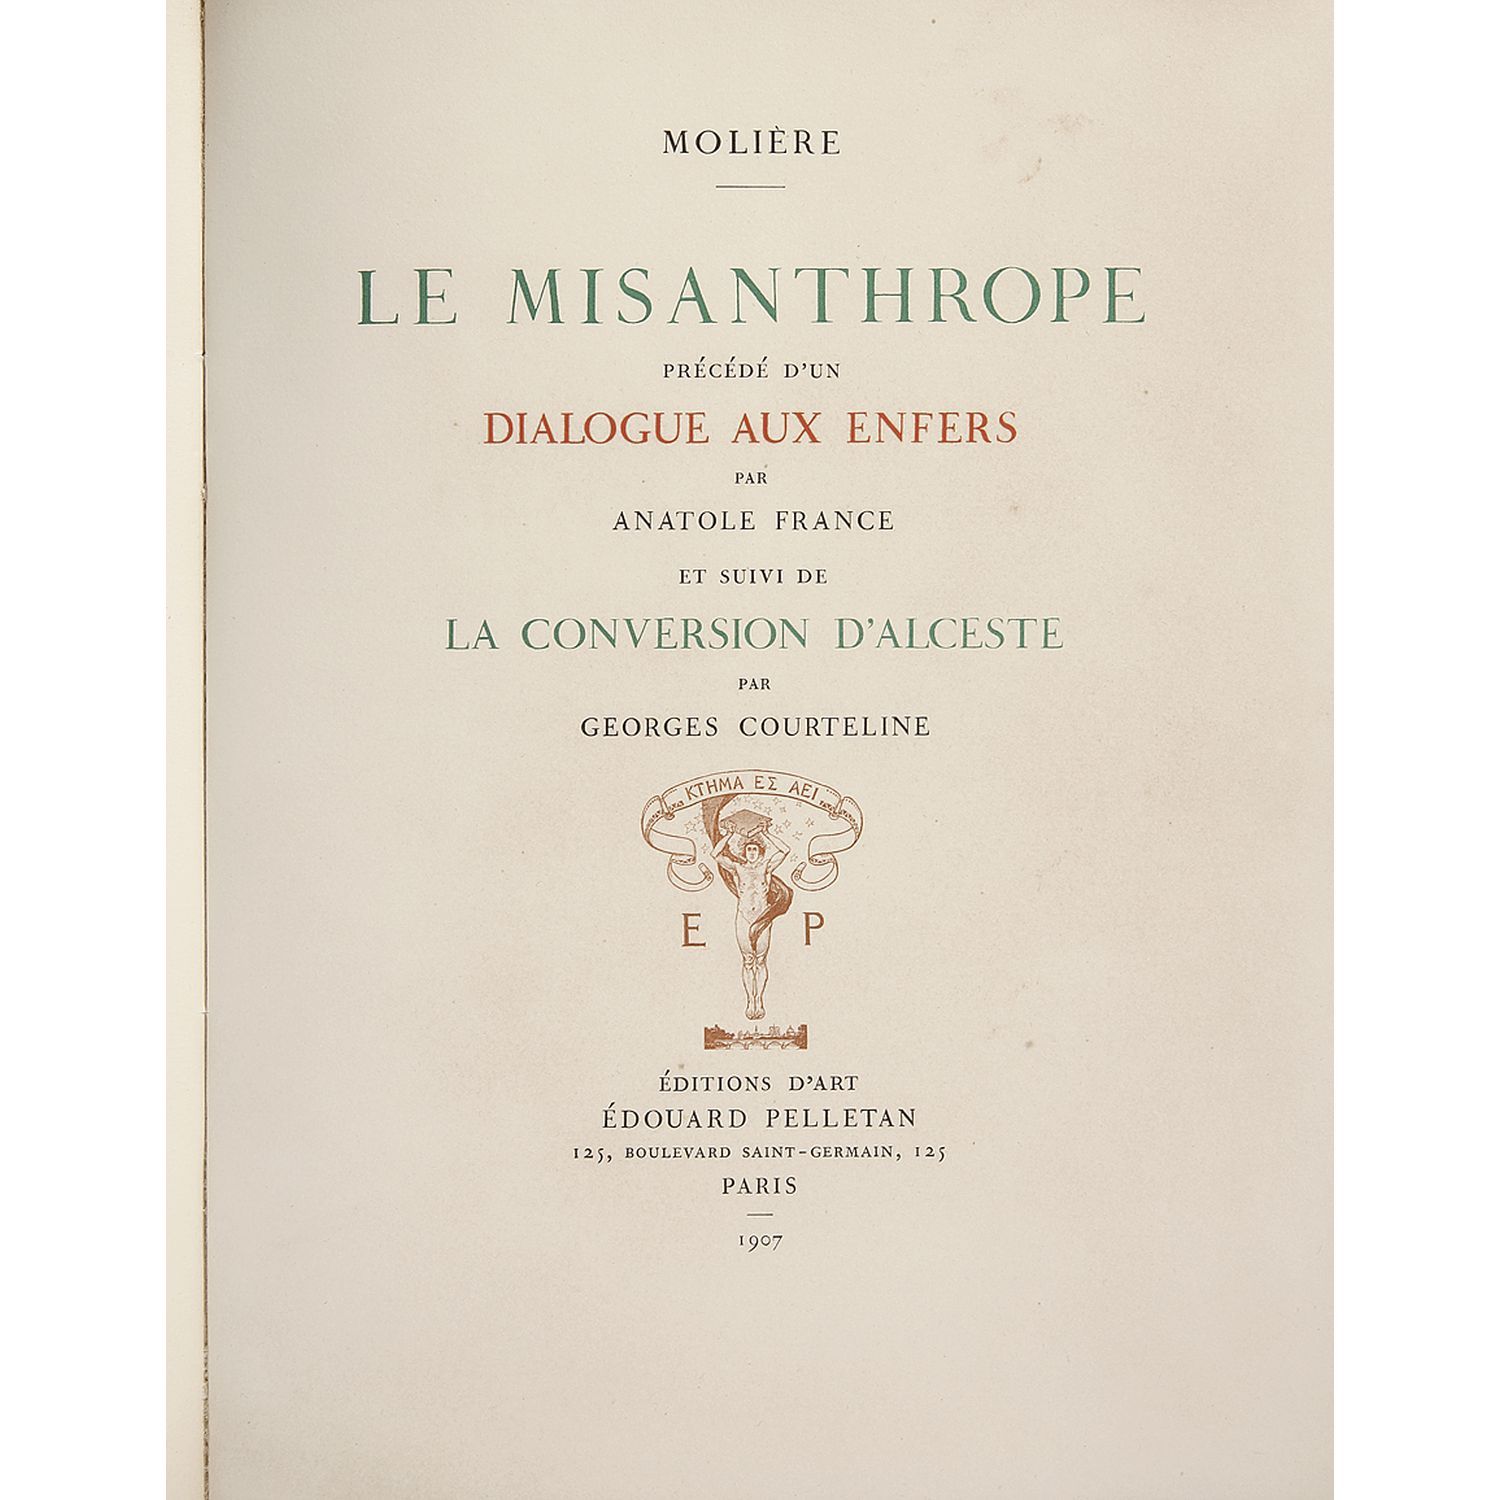 Null MOLIÈRE
Le Misanthrope, preceded by a Dialogue aux enfers by Anatole France&hellip;